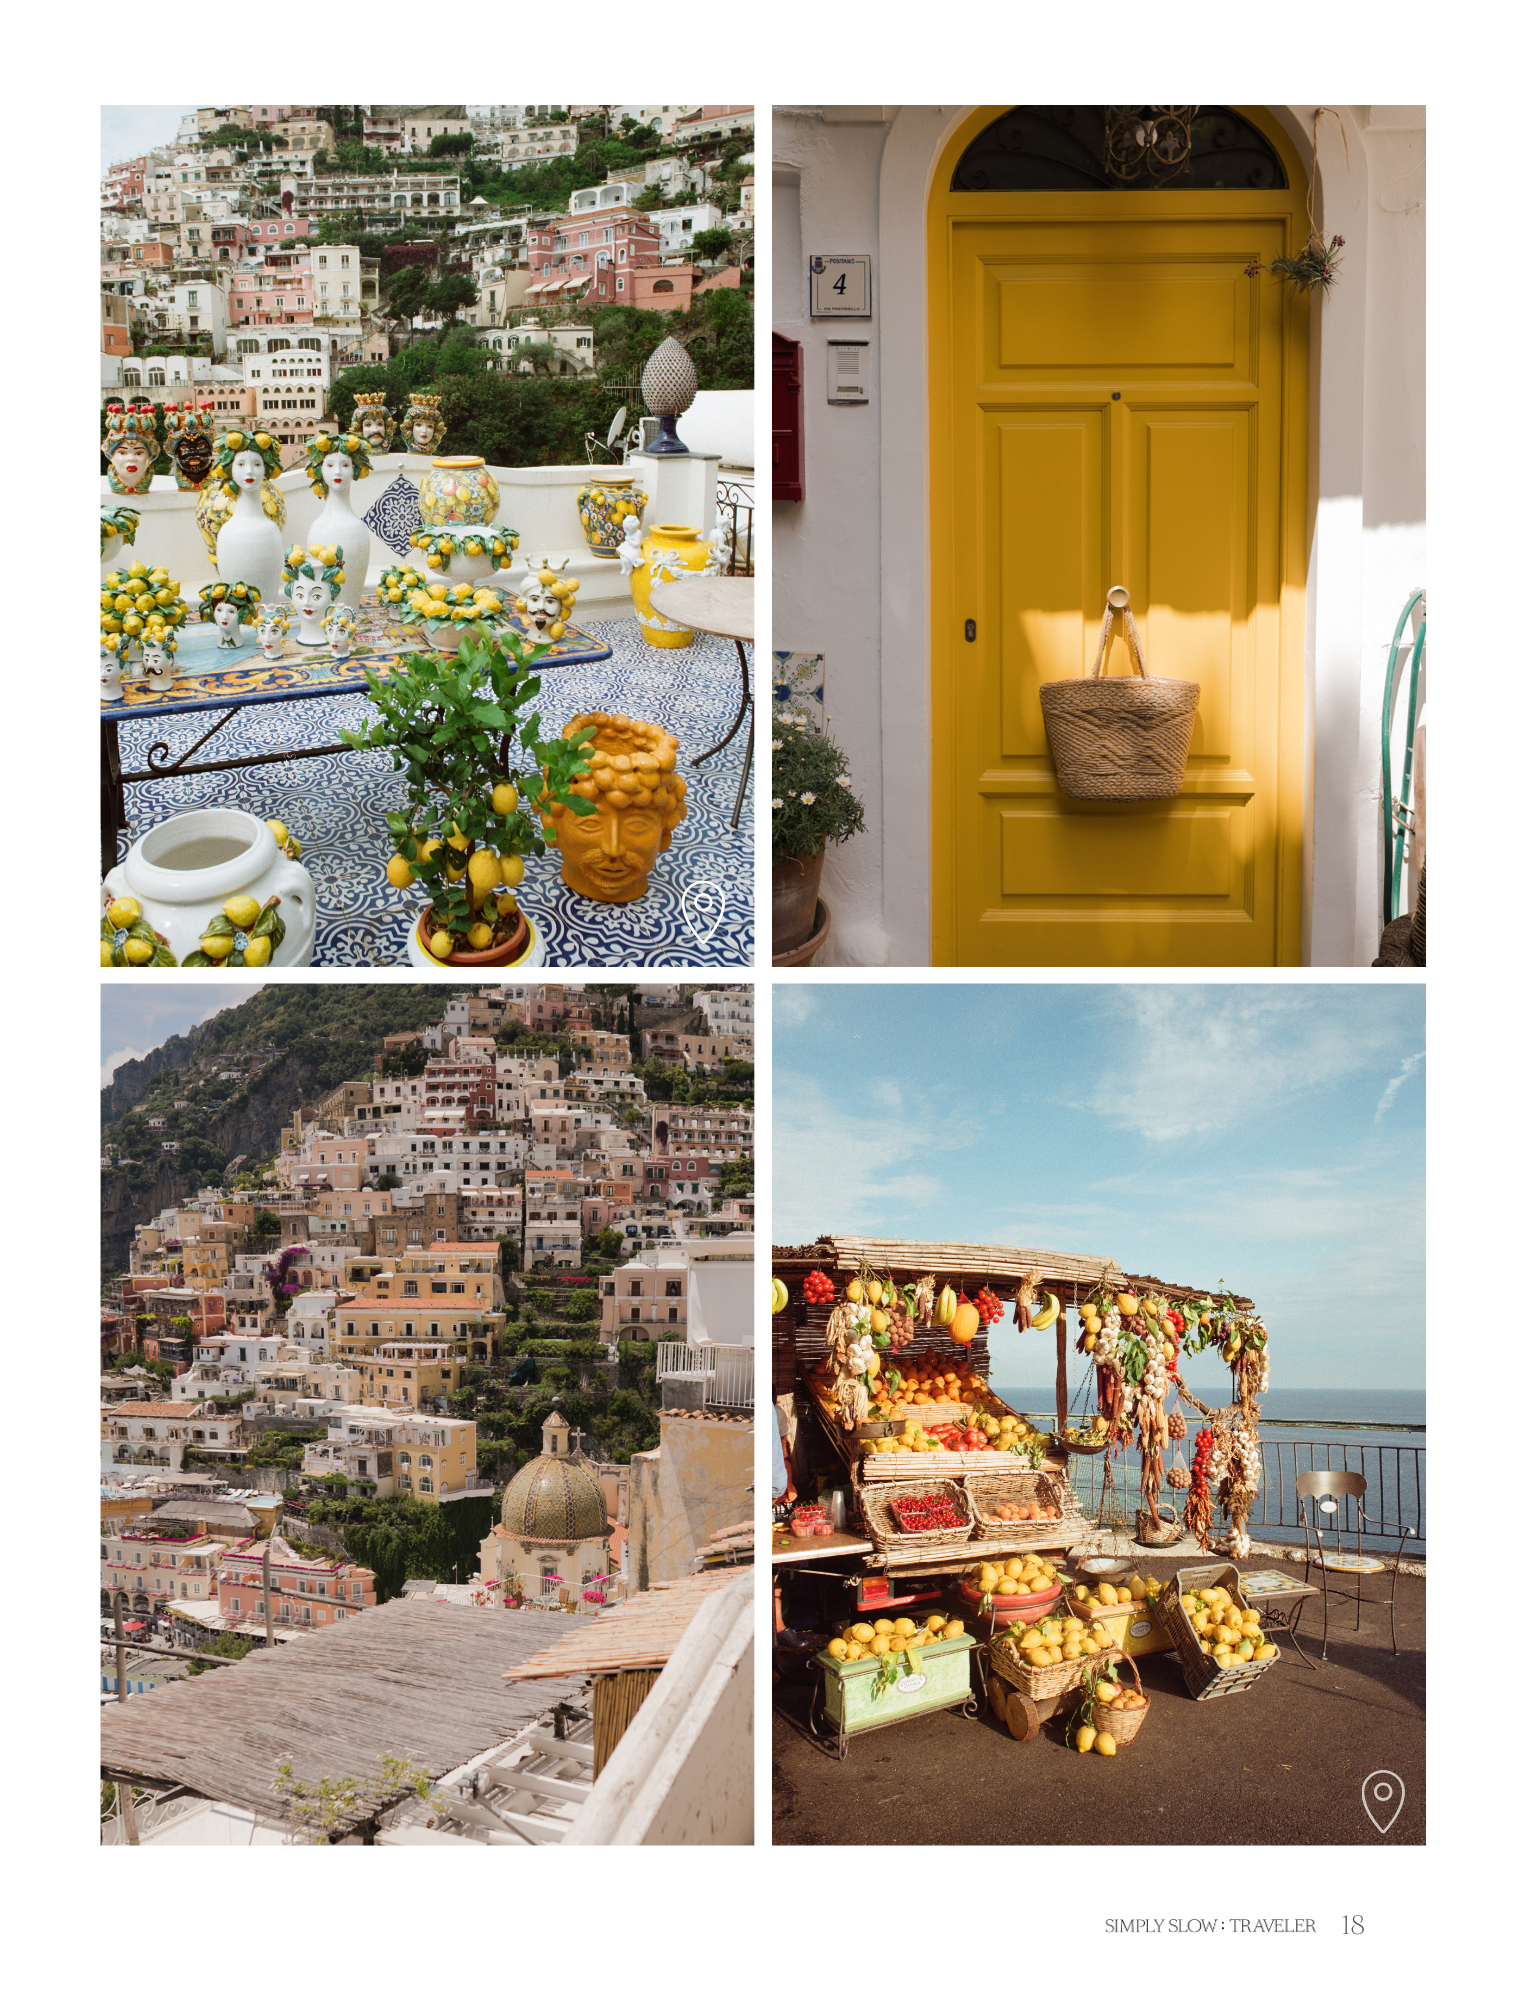 A Guide to the Amalfi Coast - page with Photos from Positano, by Simply Slow Traveler